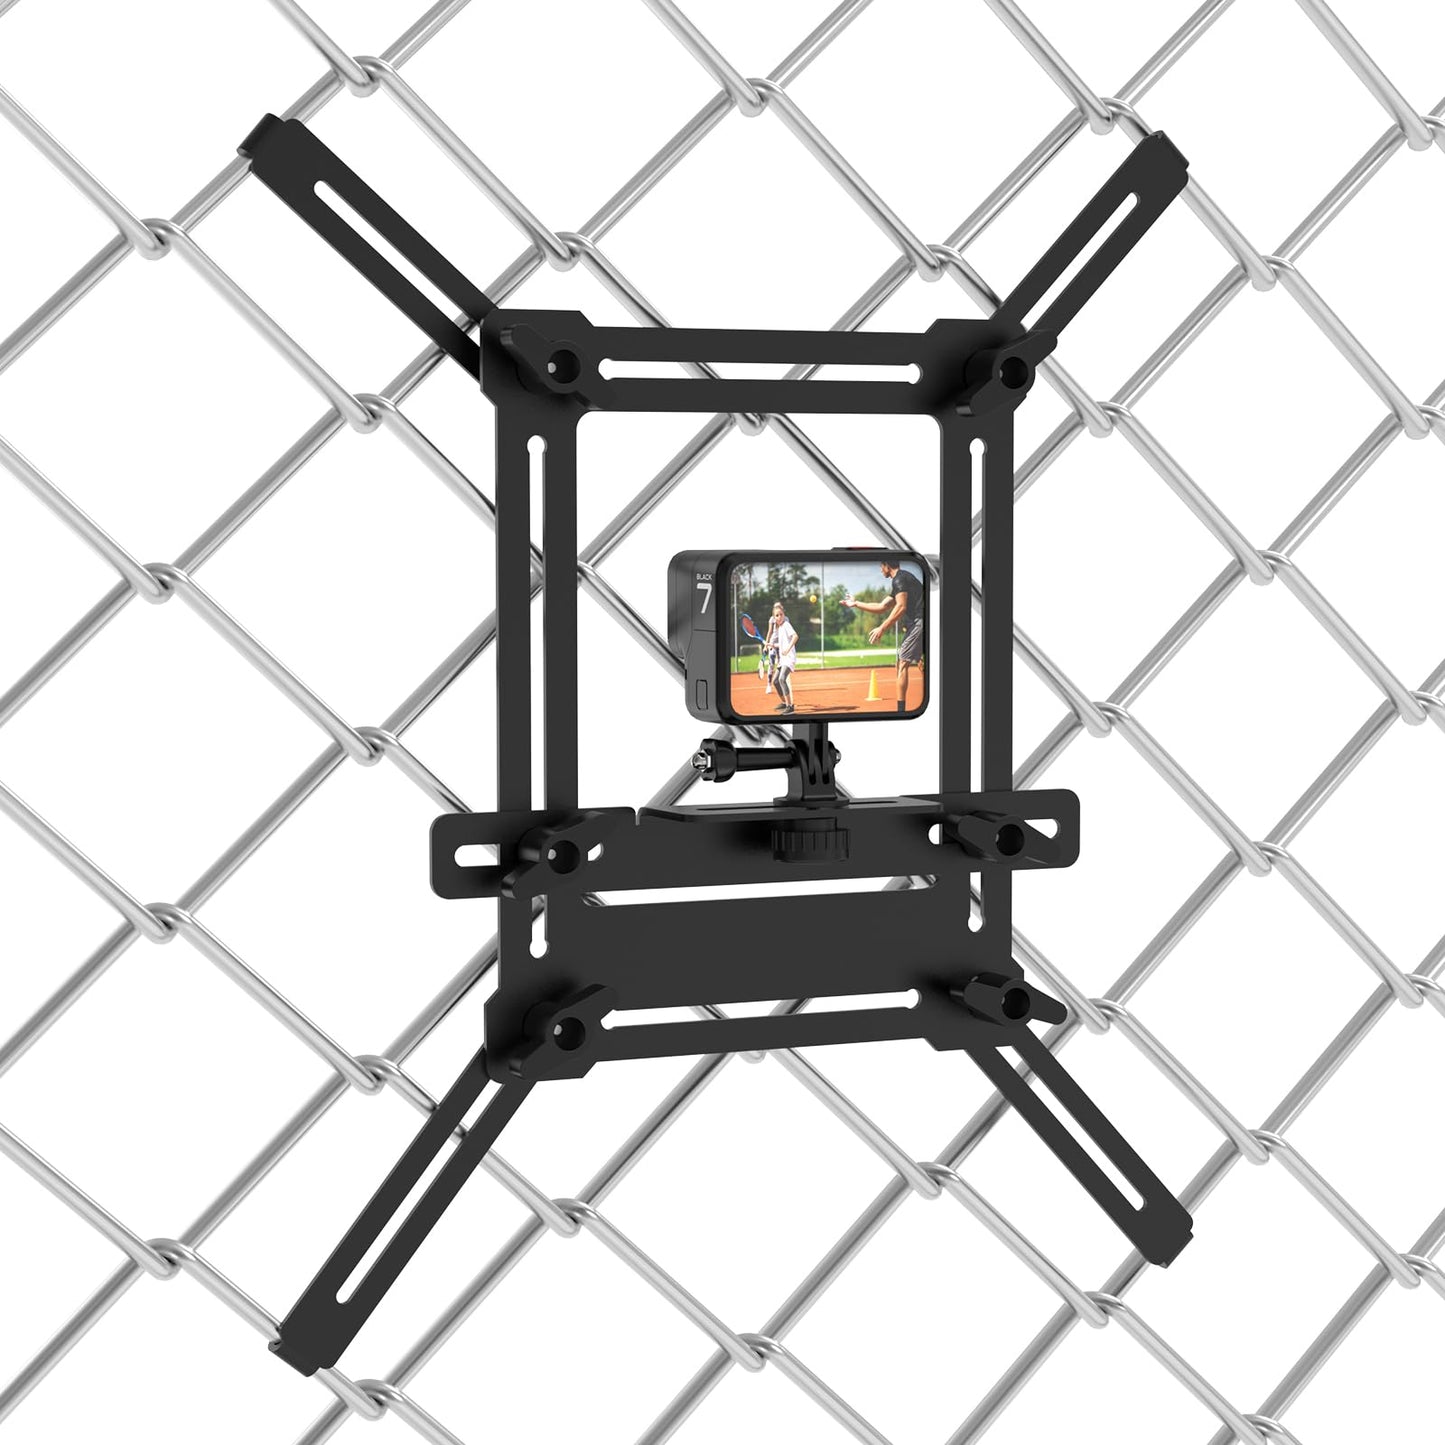 Fence Mount for Mevo Start, GoPro, iPhone, Phones, Digital Action Camera, to a Chain Link Fence for Recording Baseball,Softball and Tennis Games